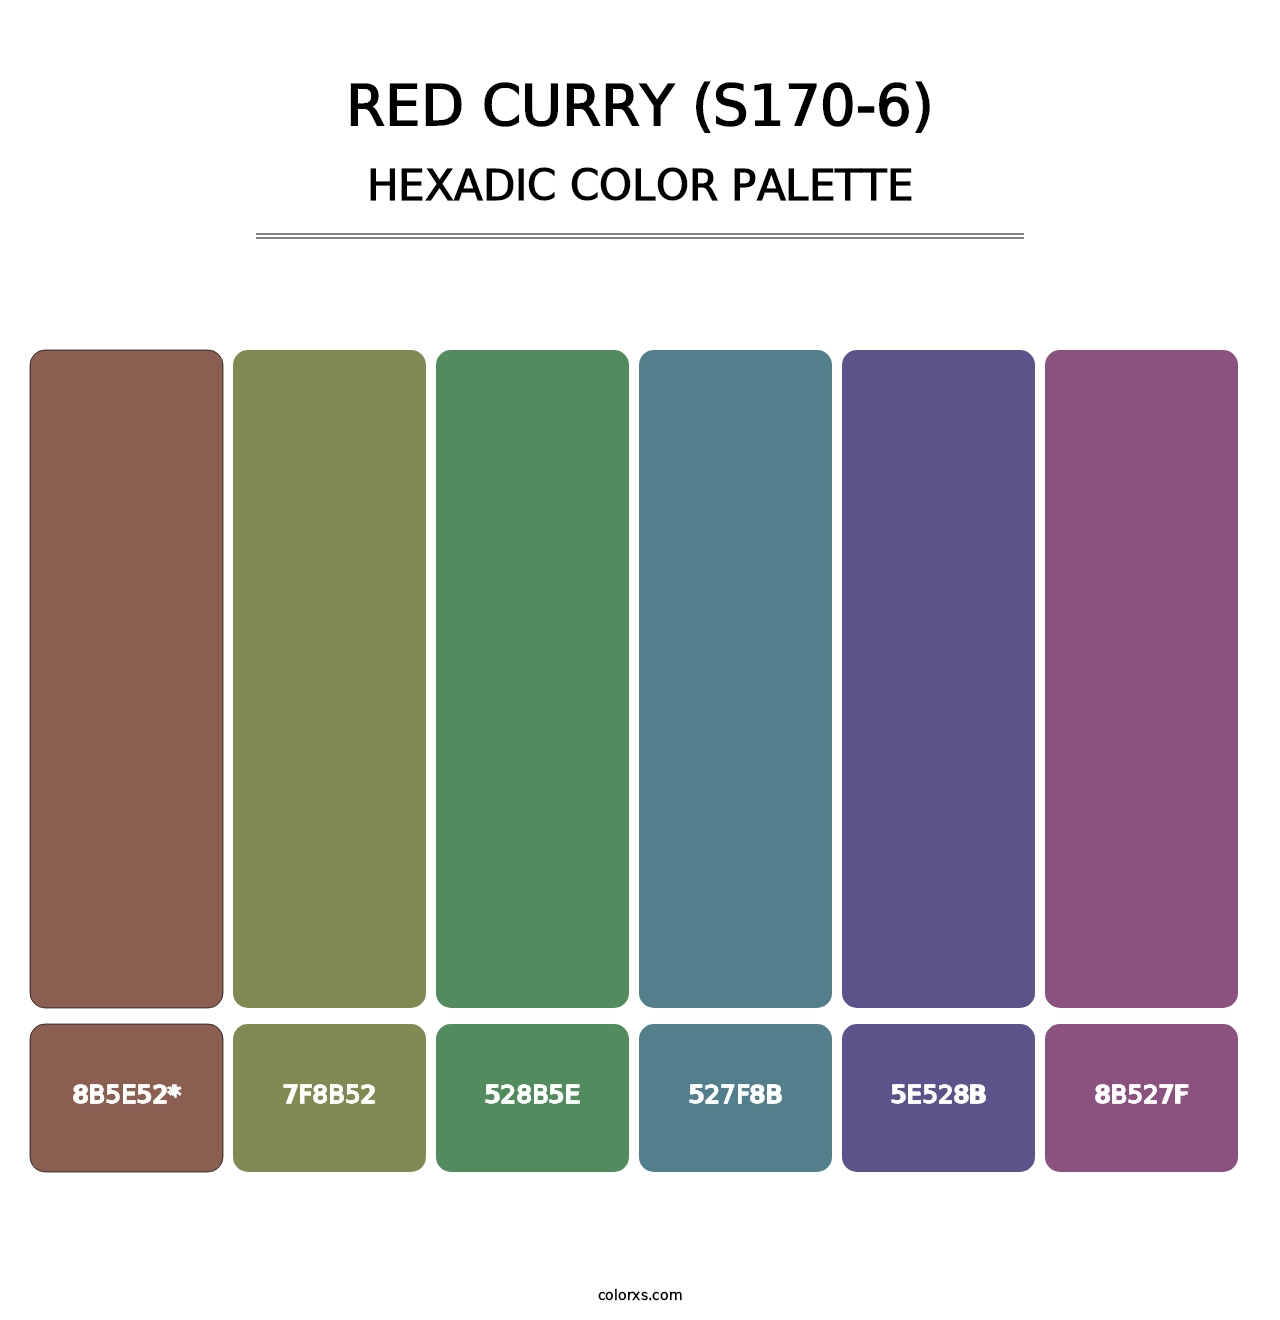 Red Curry (S170-6) - Hexadic Color Palette